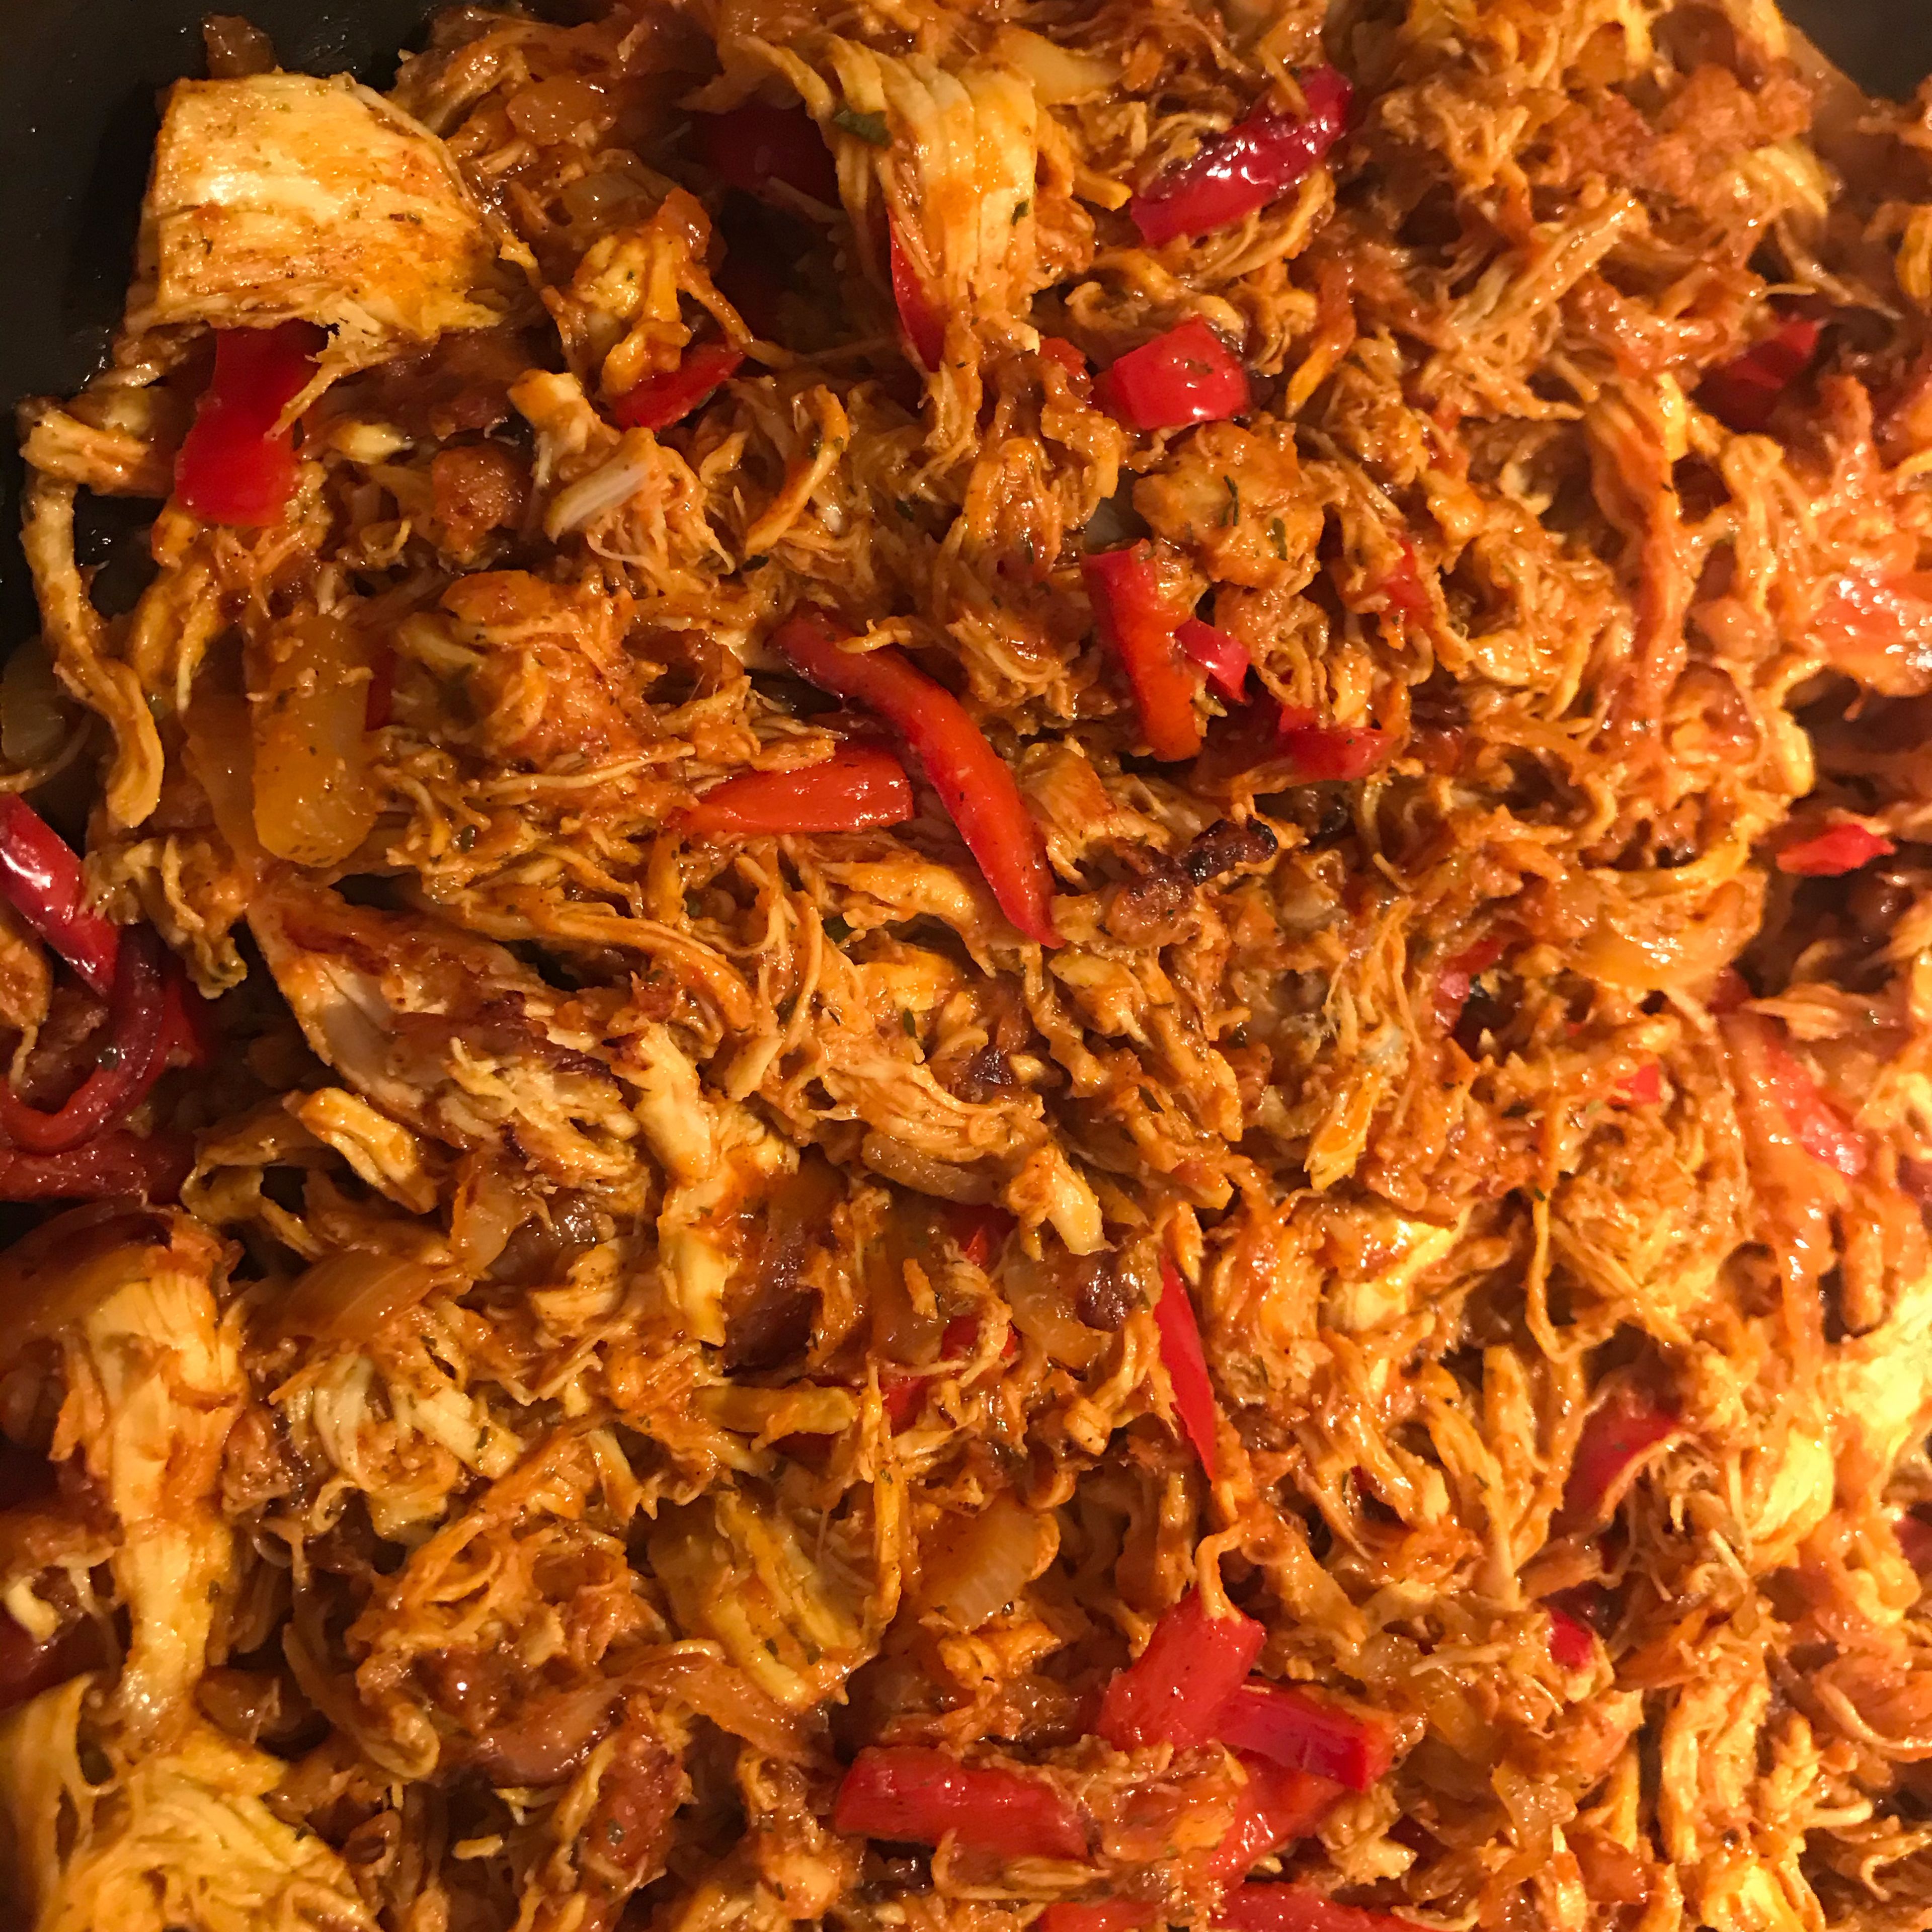 Heat oil in frying pan, add onions and fry for 4 min. After add red pepper and fry for 3 min, then add pulled chicken and fry for 3 min more. Add ketchup, salt and pepper, chilli powder and fry for 4 min and off the heat.